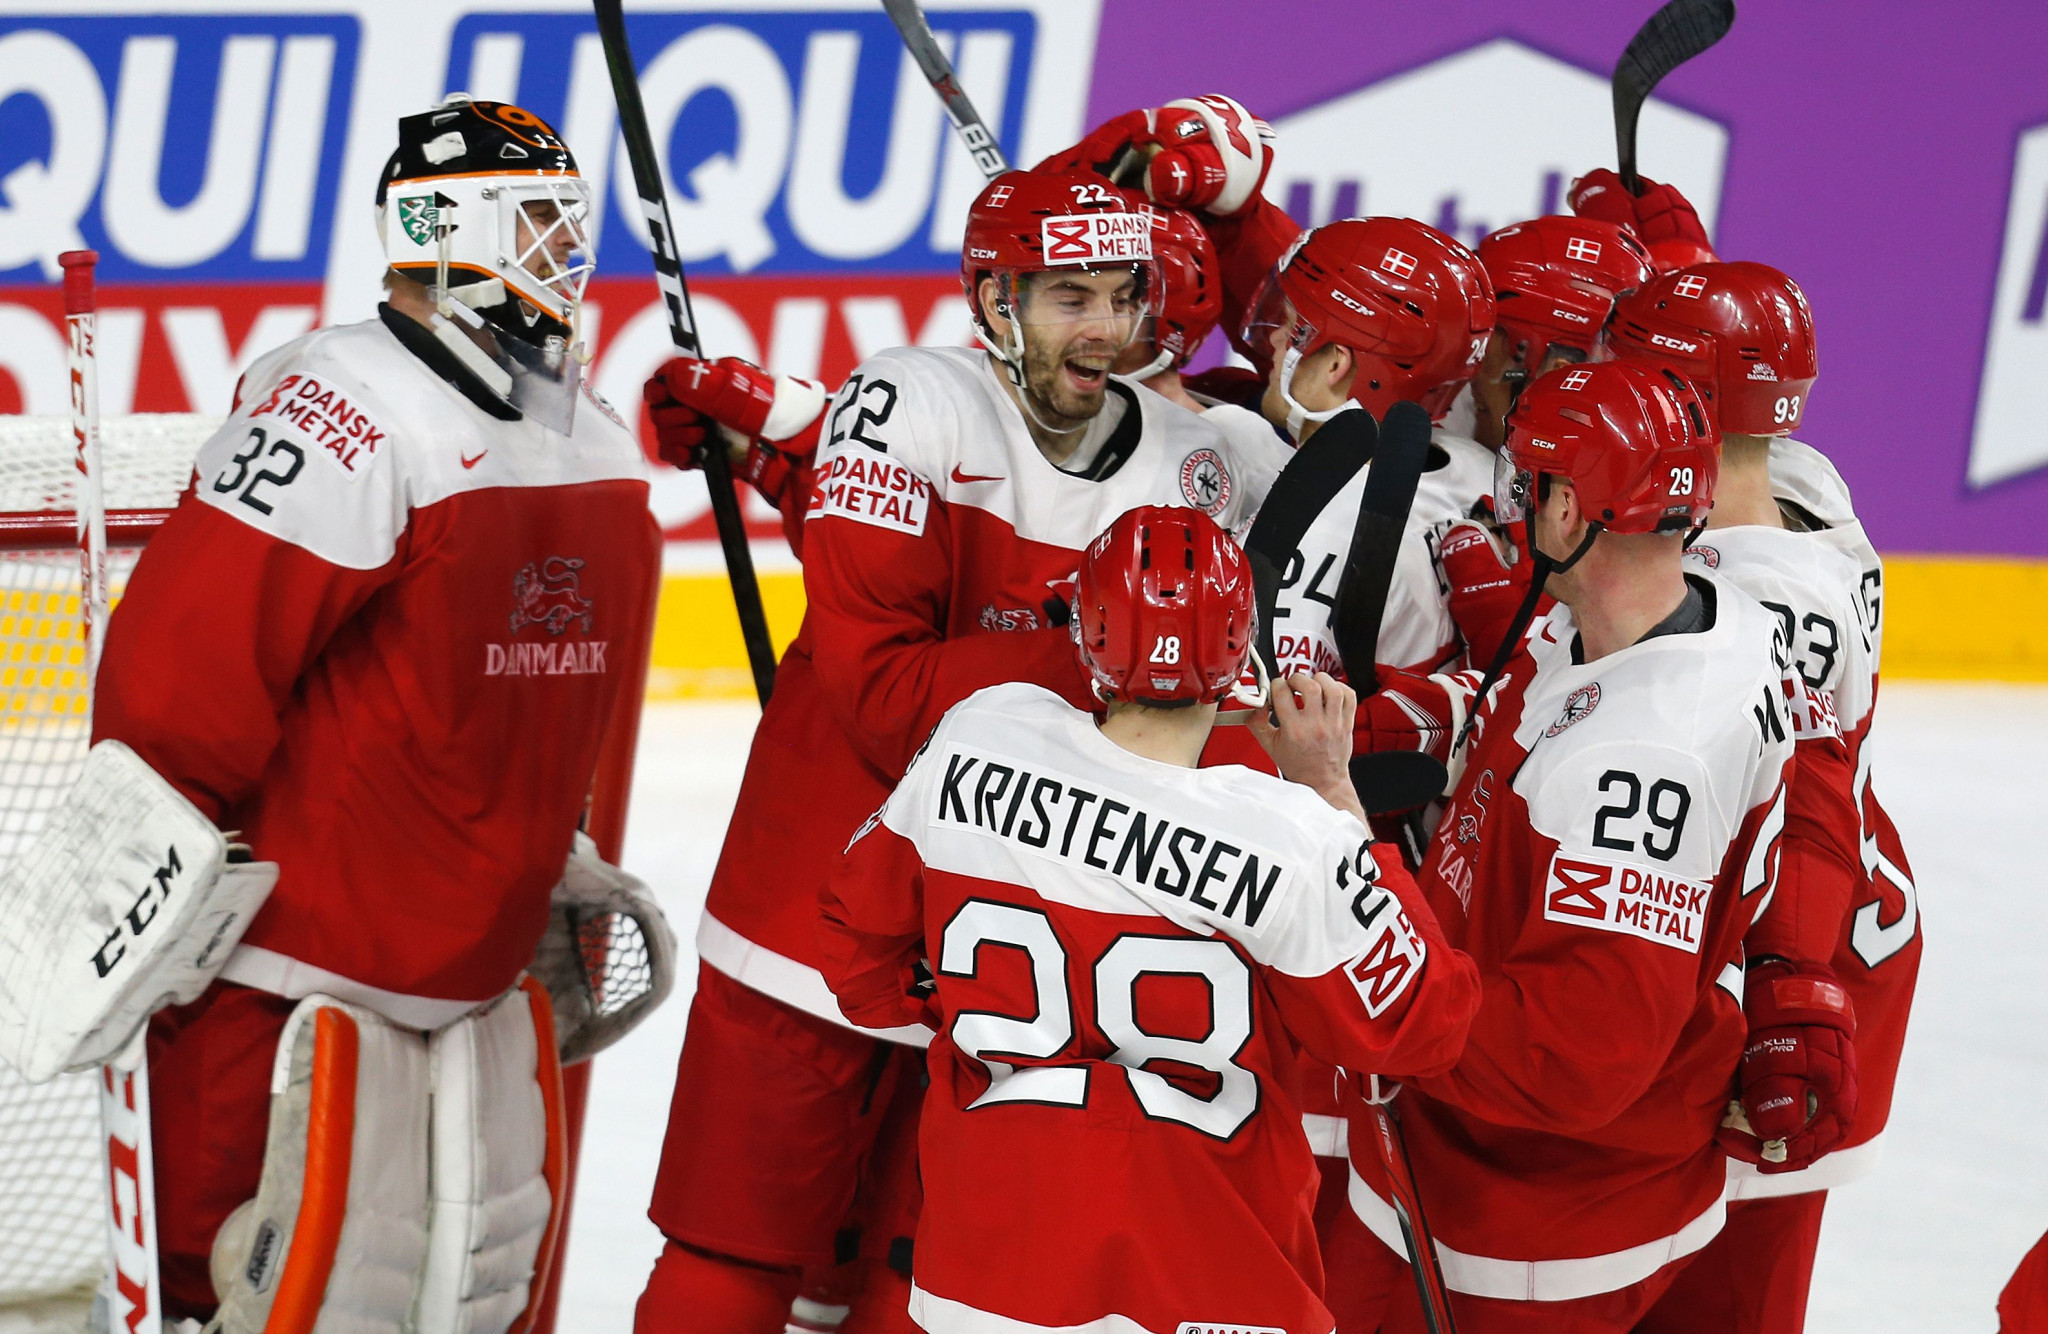 Denmark will be hoping for glory on home ice a the IIHF World Championship ©Getty Images